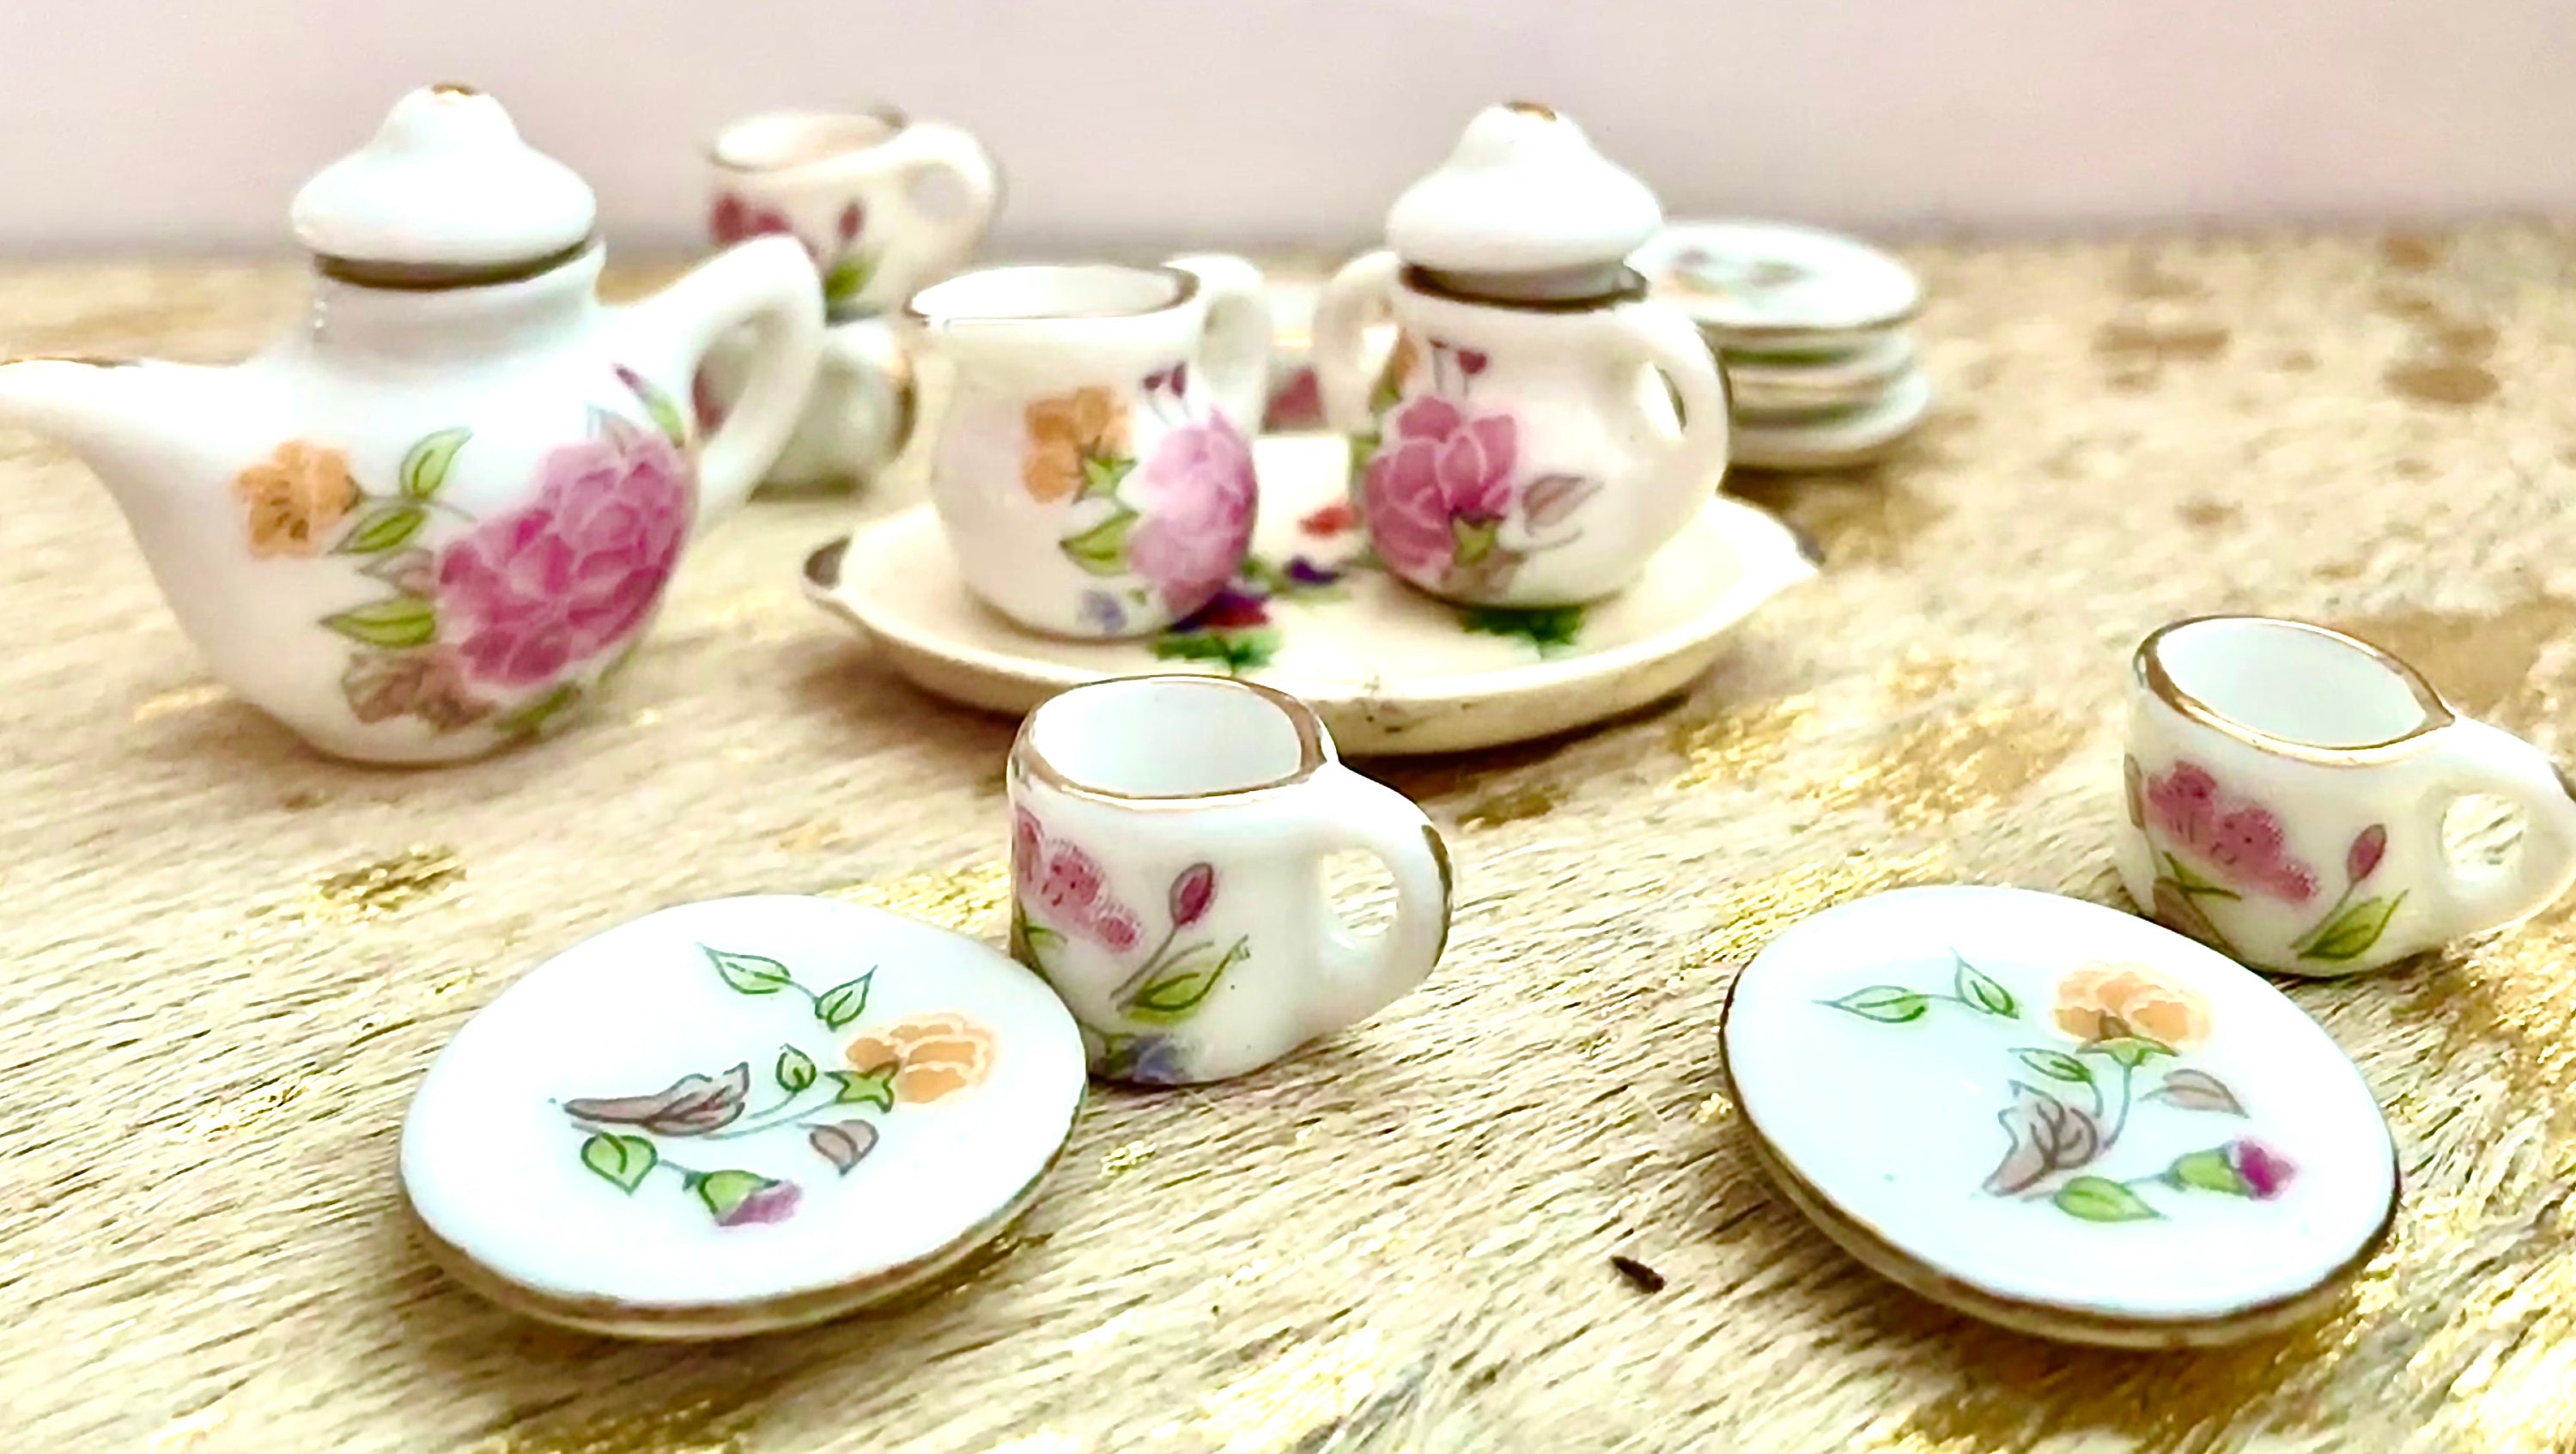 Buy Genuine Chinese Tea Cups from China – Umi Tea Sets